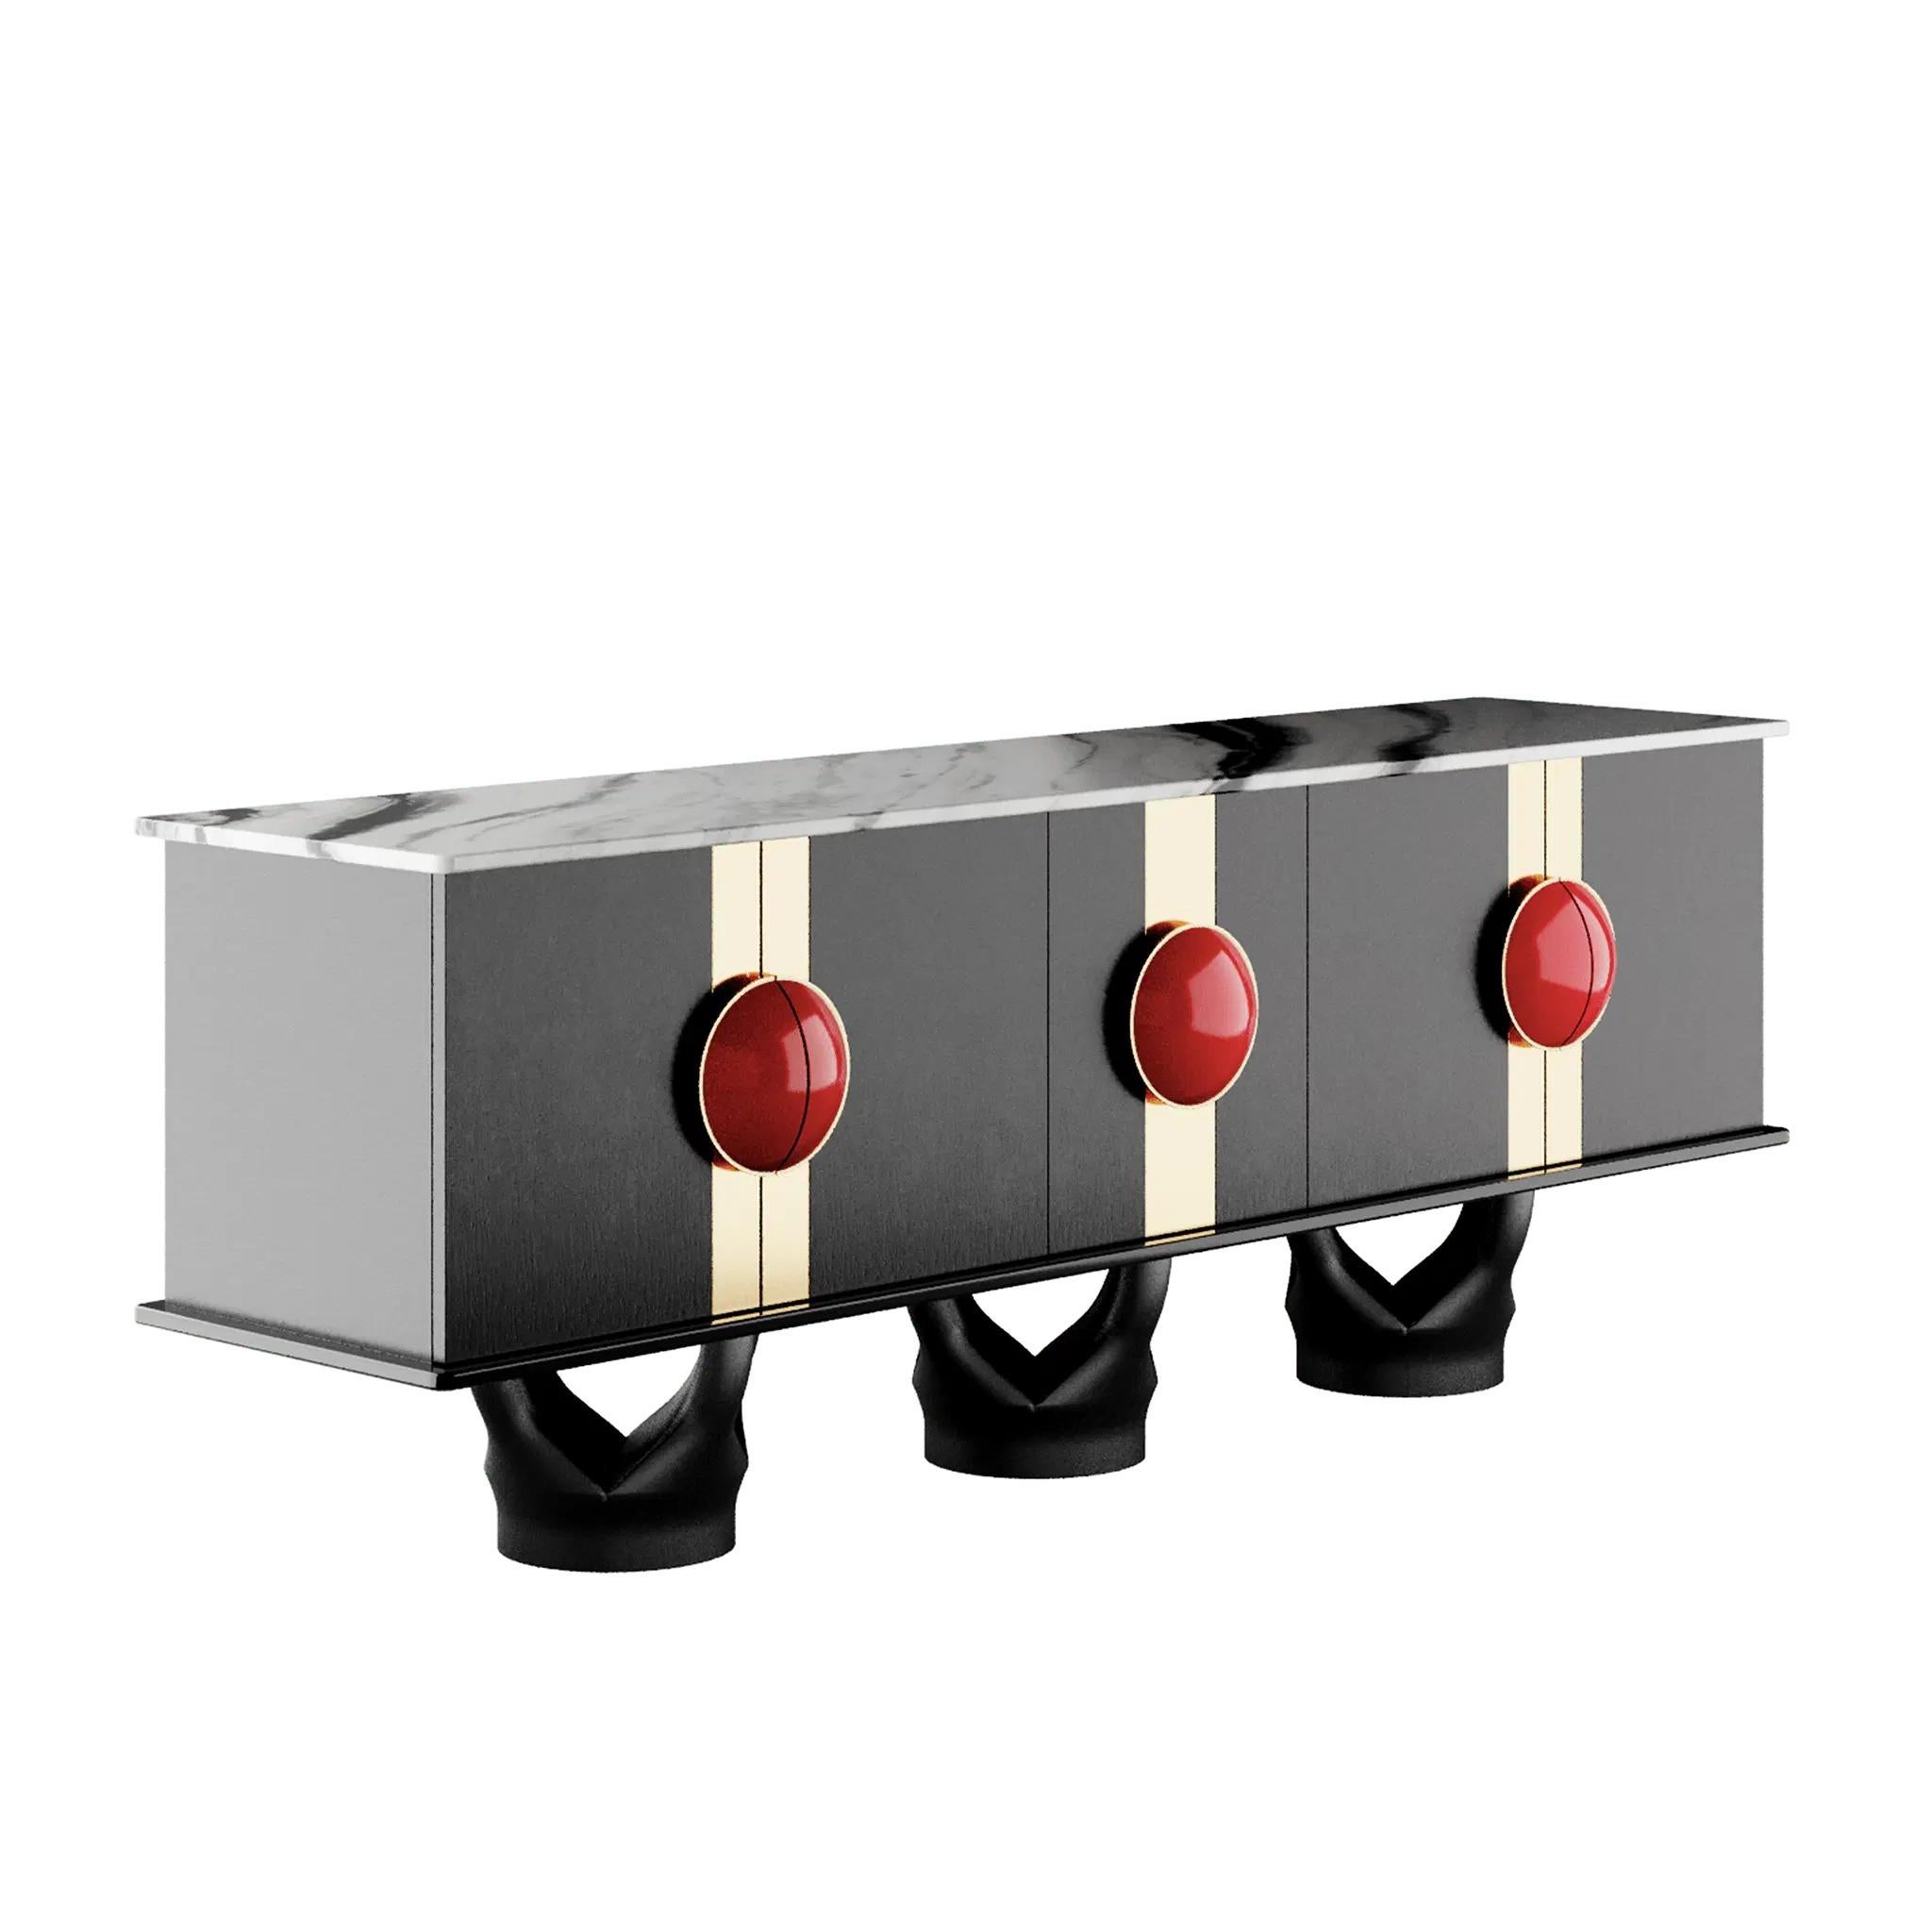 Limited Edition: Art Deco Marino Sideboard is an exclusive furniture piece for a contemporary interior design project. A contemporary sideboard with unique shapes is the wild card for your interior design project.

Materials: Top in Panda Marble.